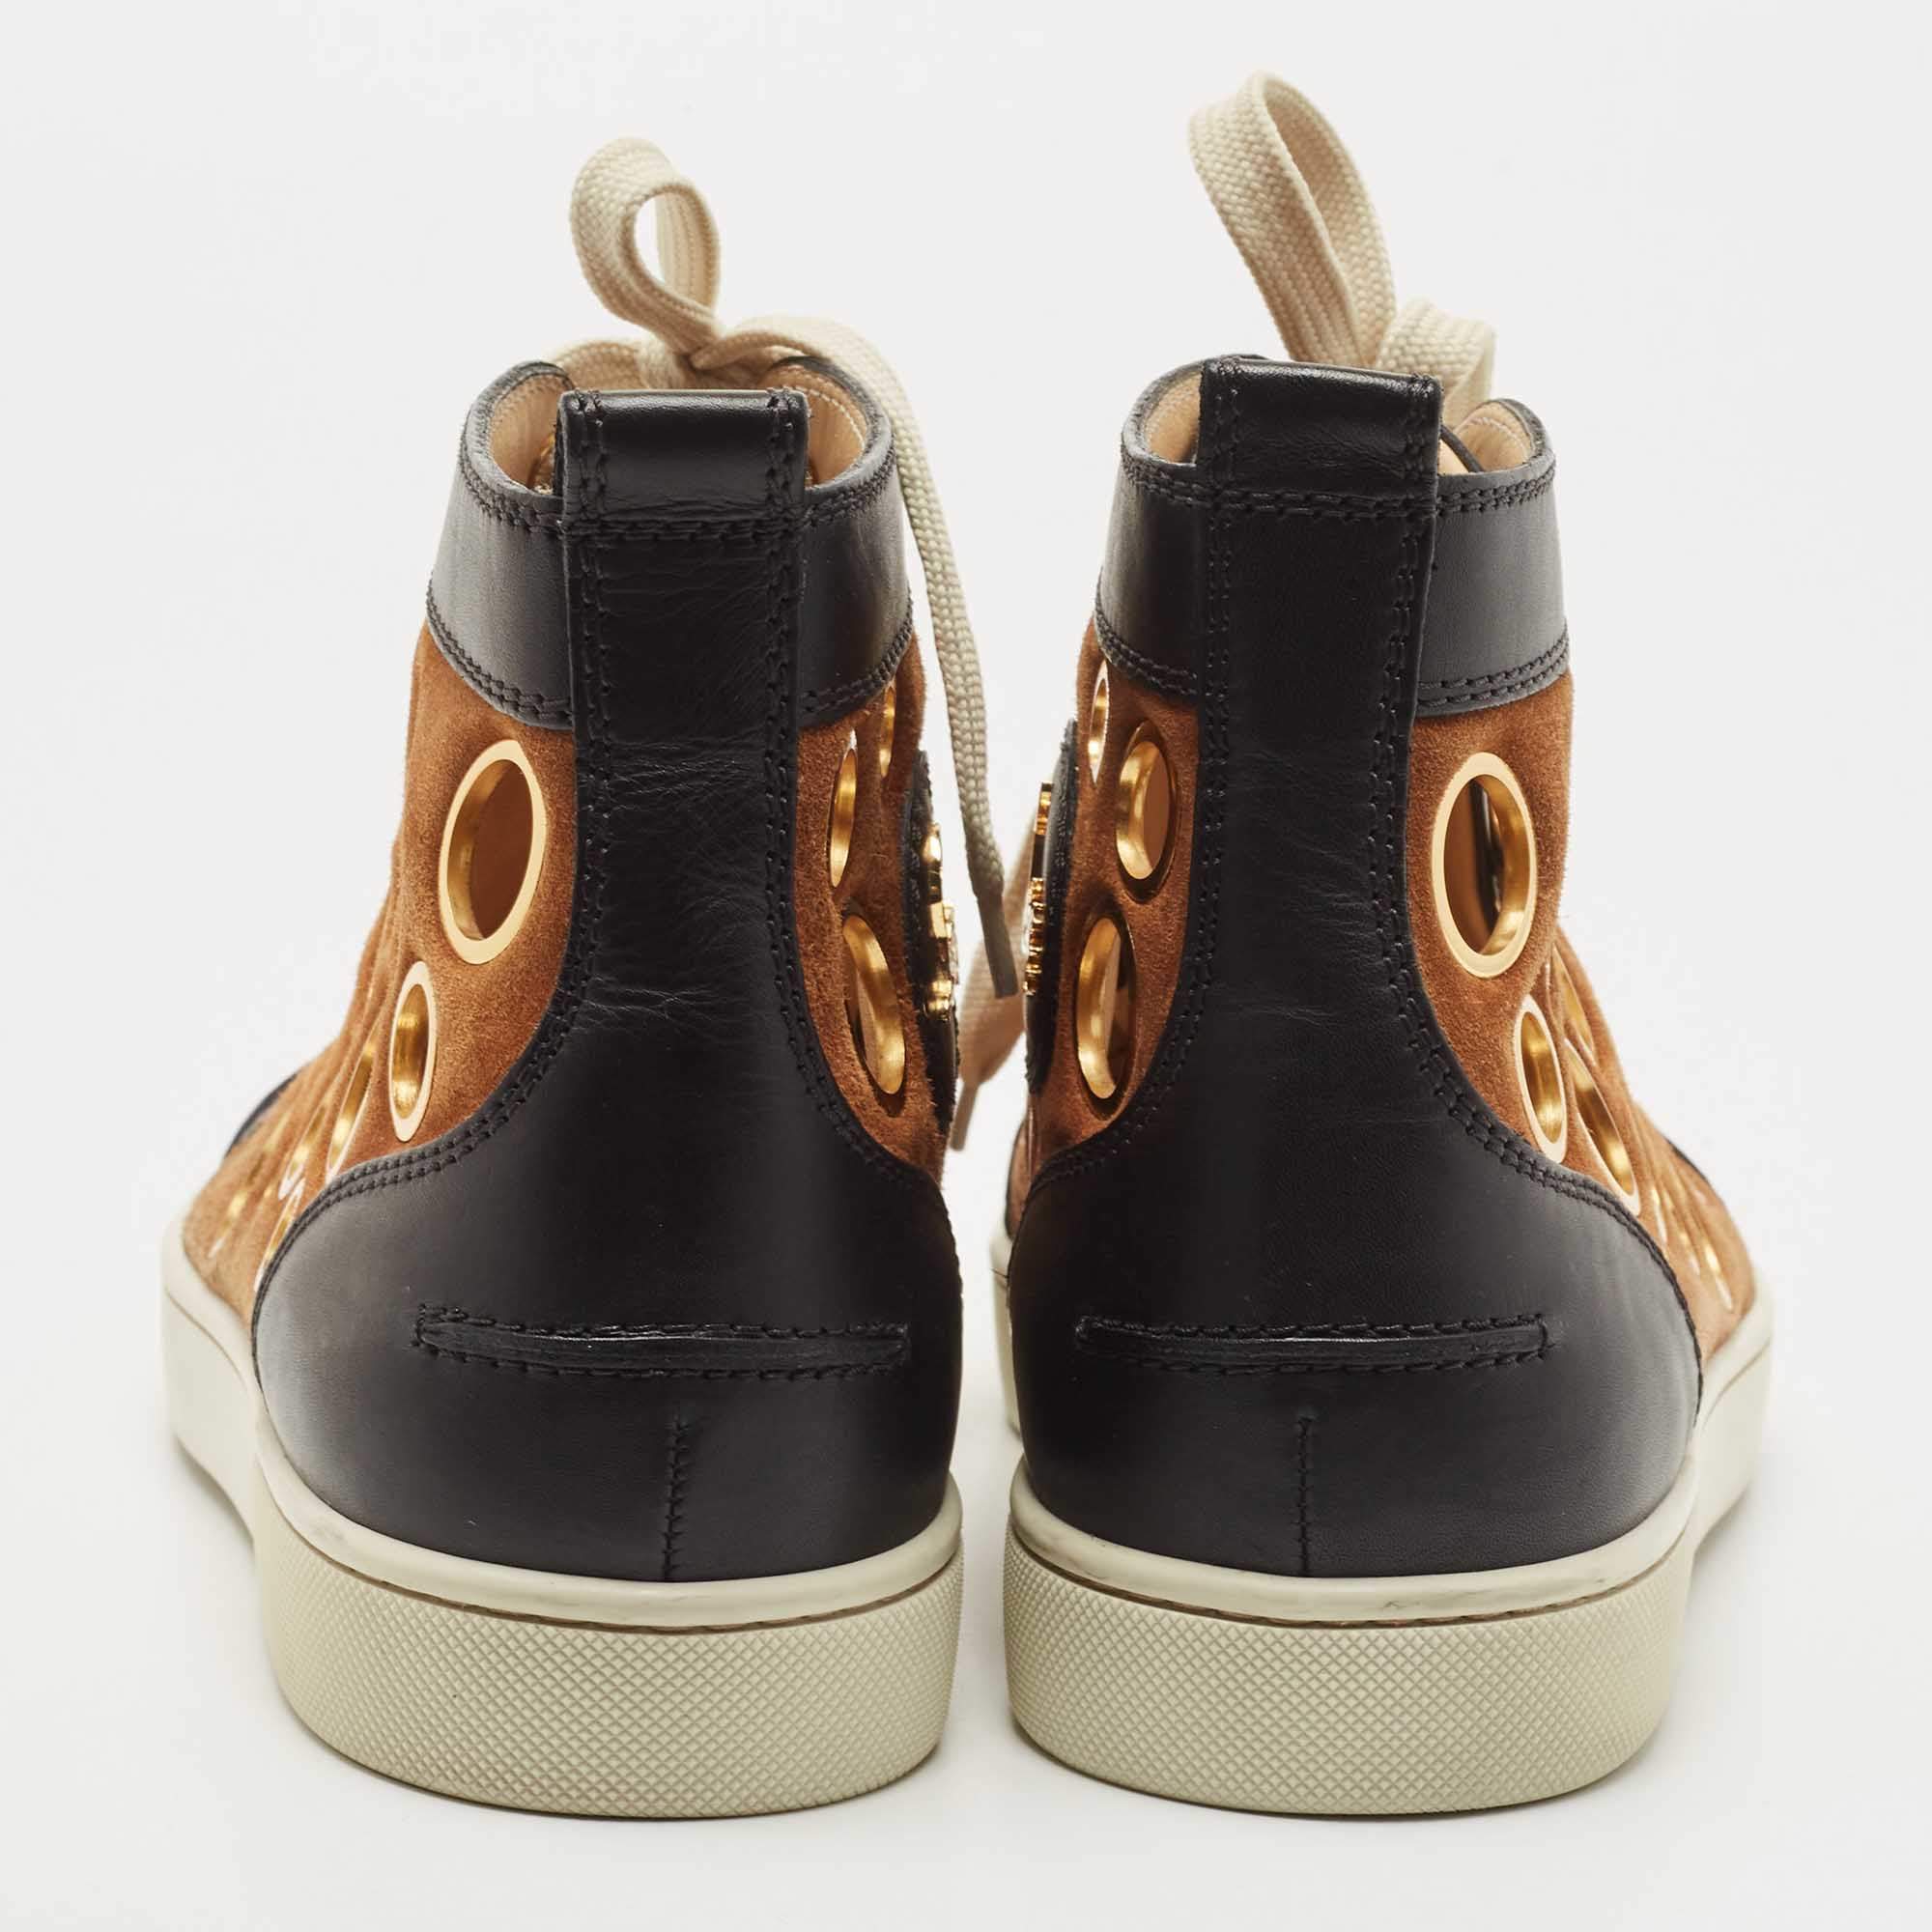 Christian Louboutin Black/Brown Leather and Suede Laser Cut High